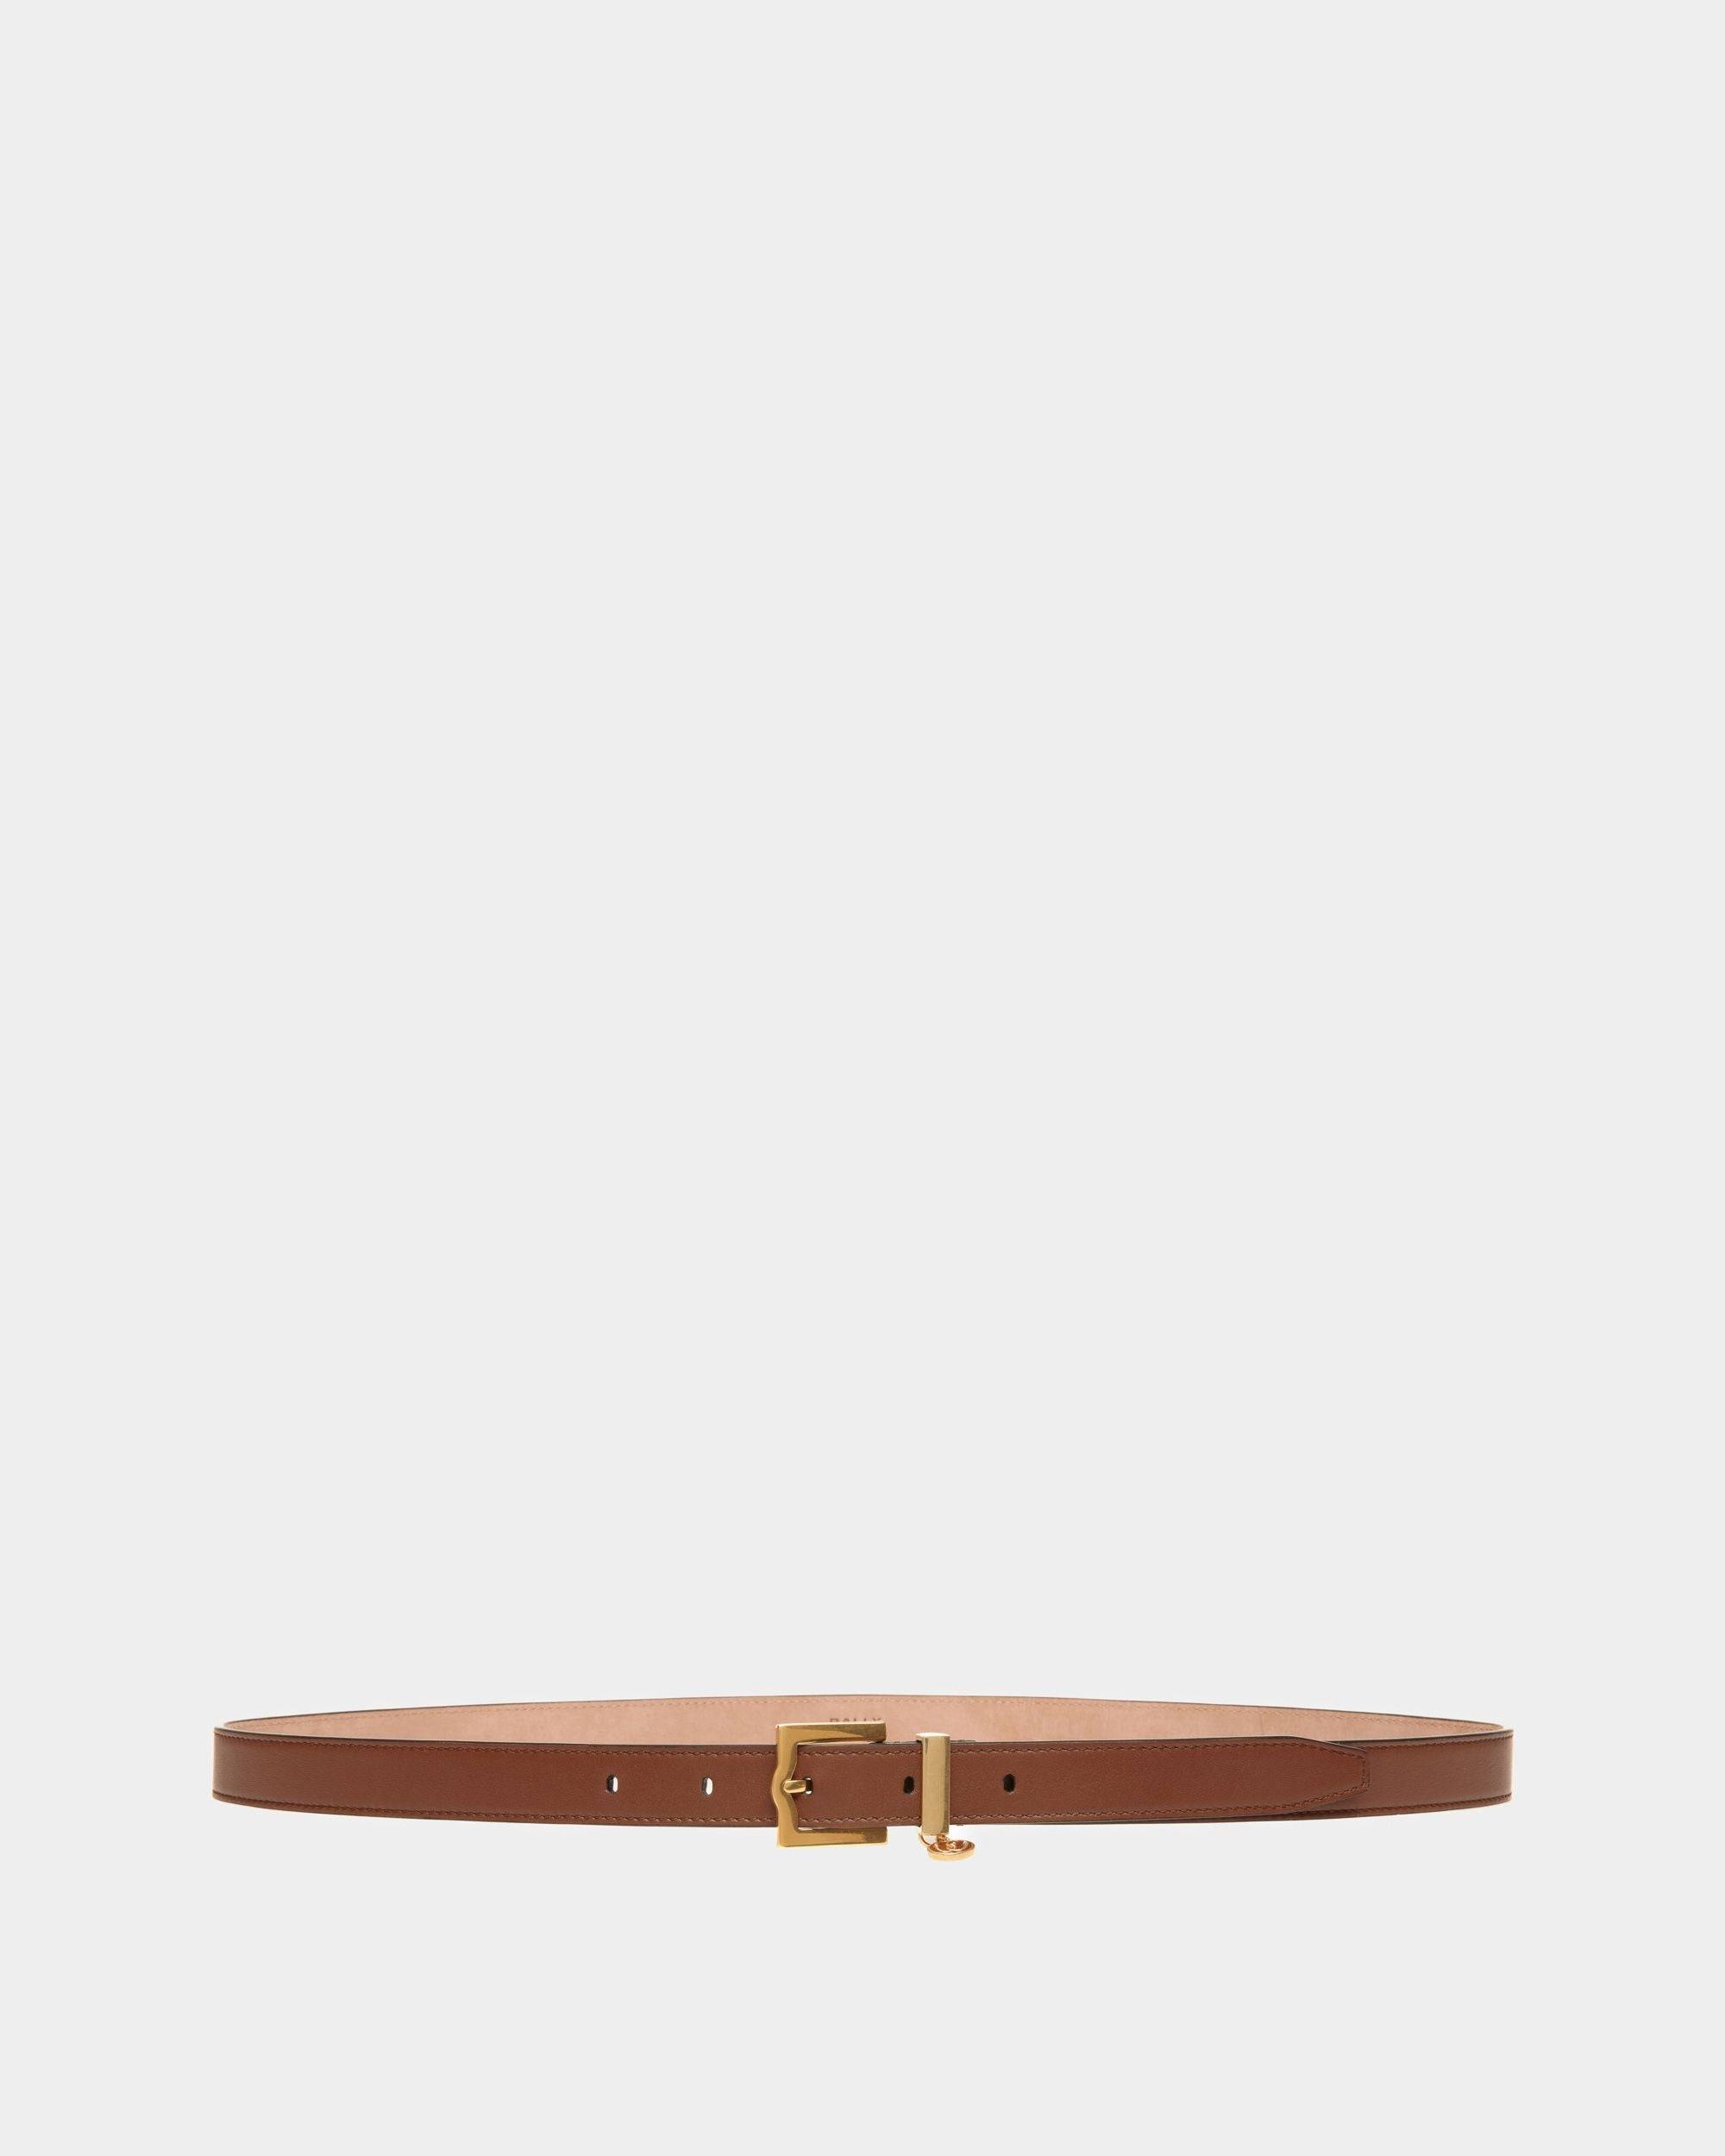 Women's Emblem 20mm Belt in Brown Leather | Bally | Still Life Front